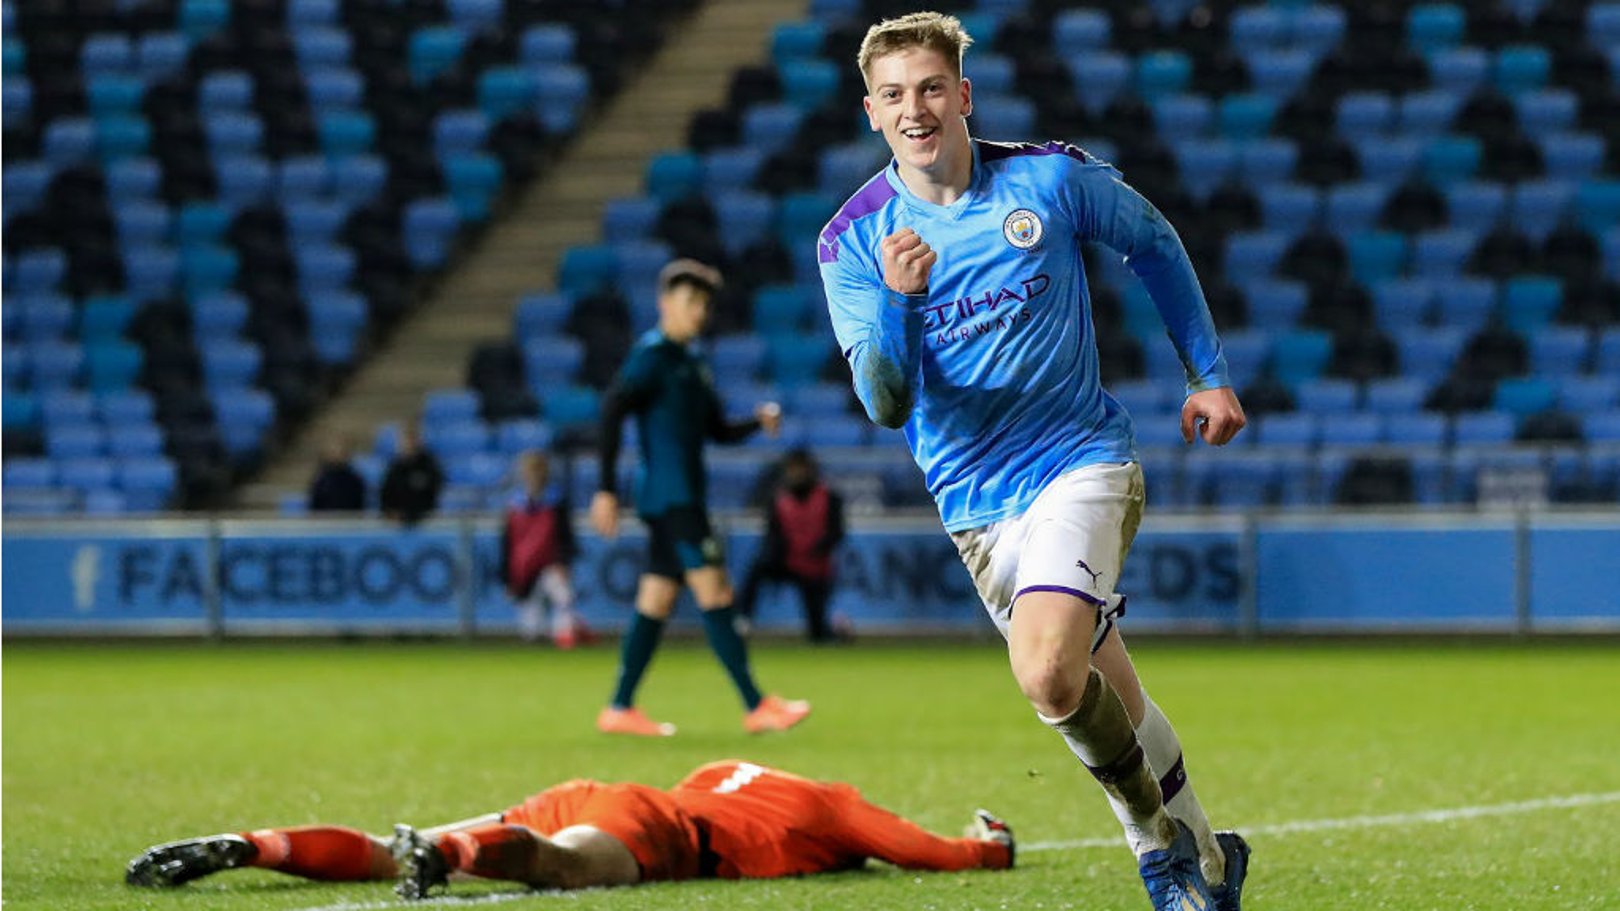 City to resume bid for FA Youth Cup success